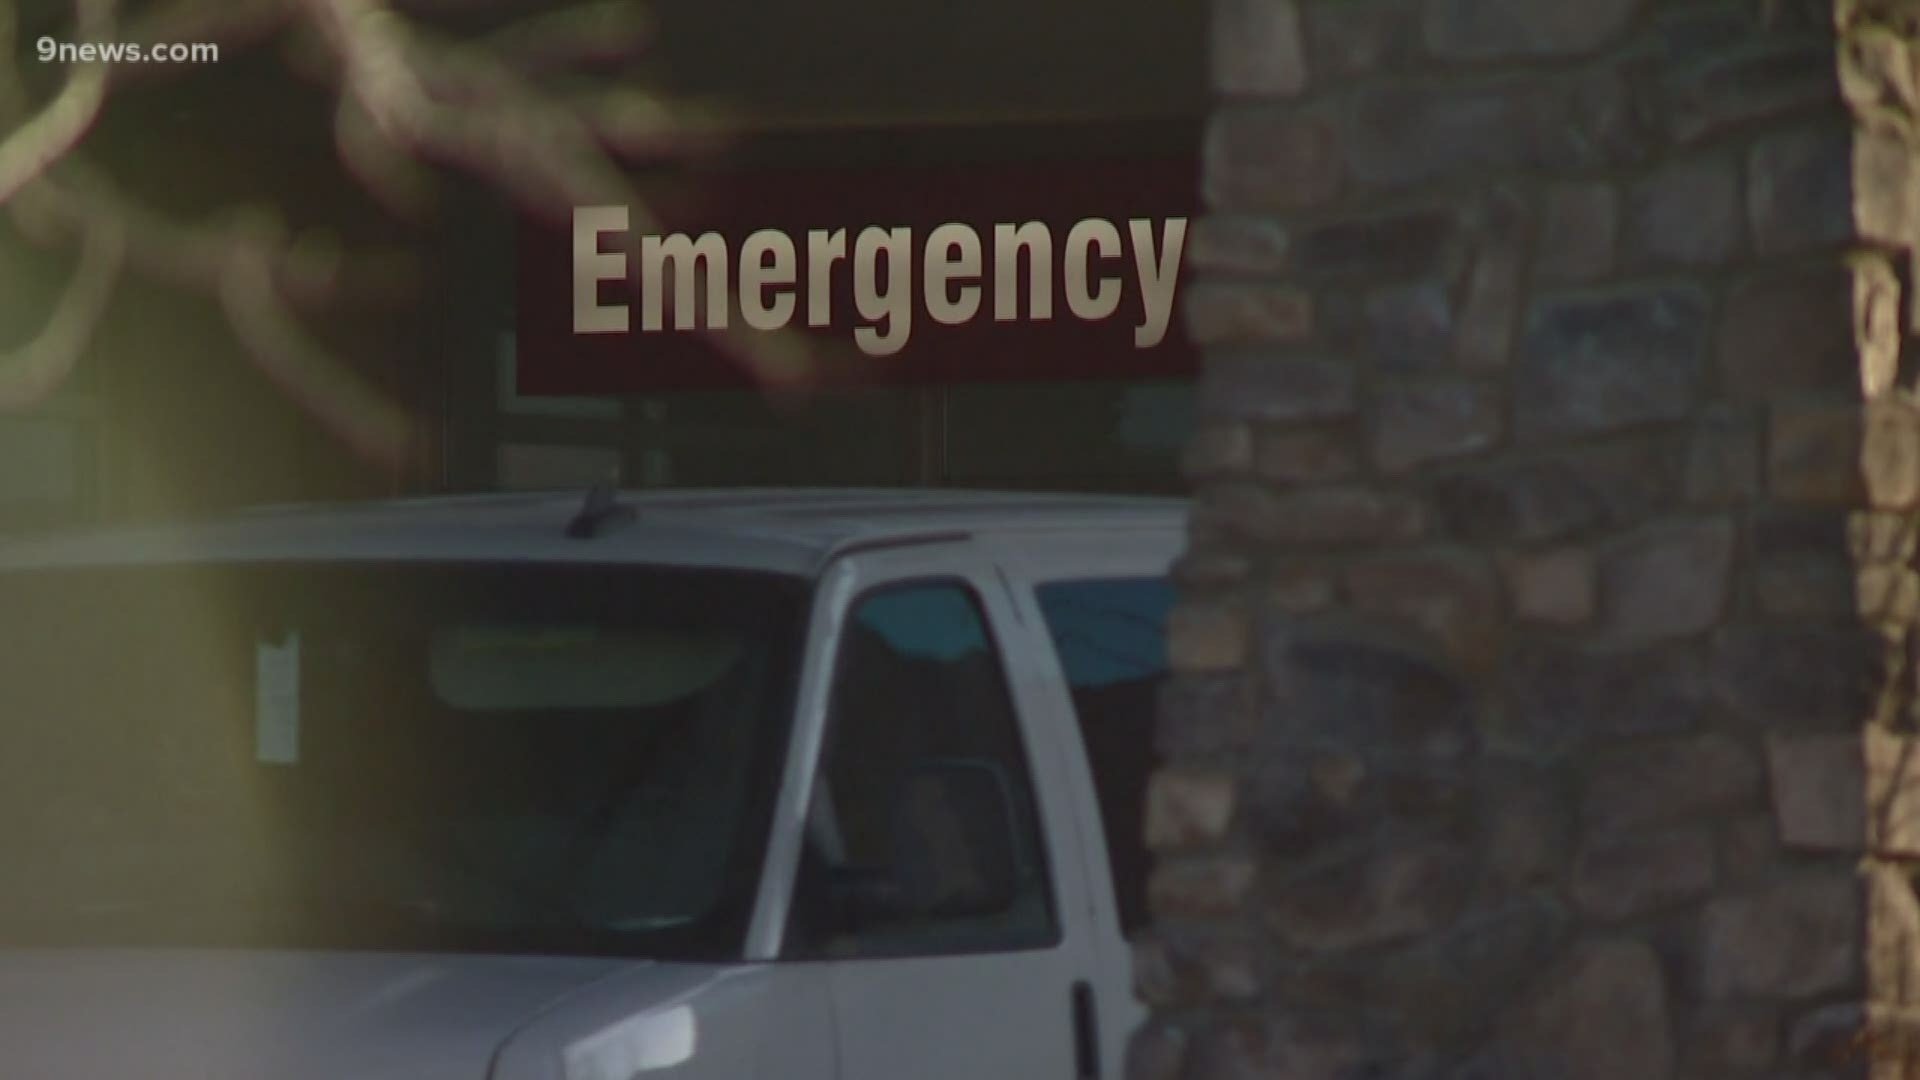 9NEWS digs into why the northern Colorado county has been hit especially hard.